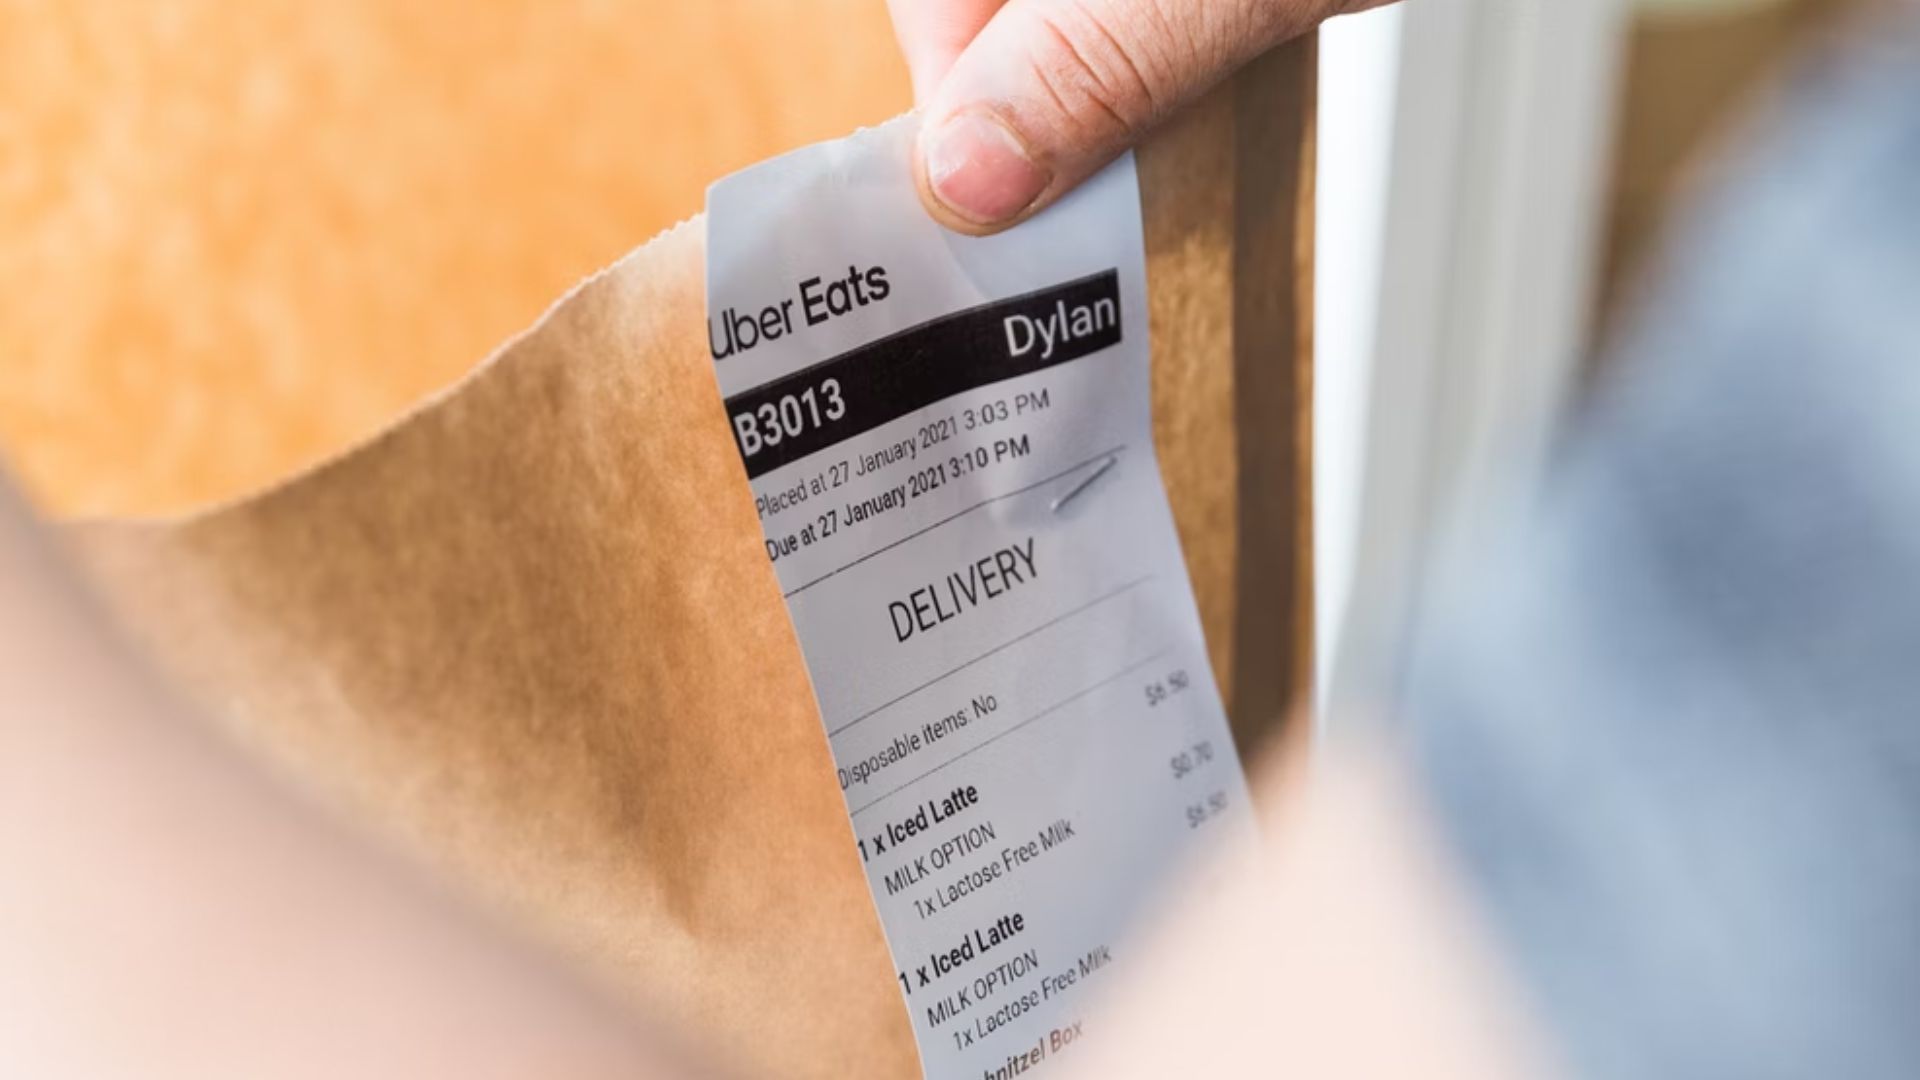 closeup of an uber eats delivery receipt stapled to a brown bag